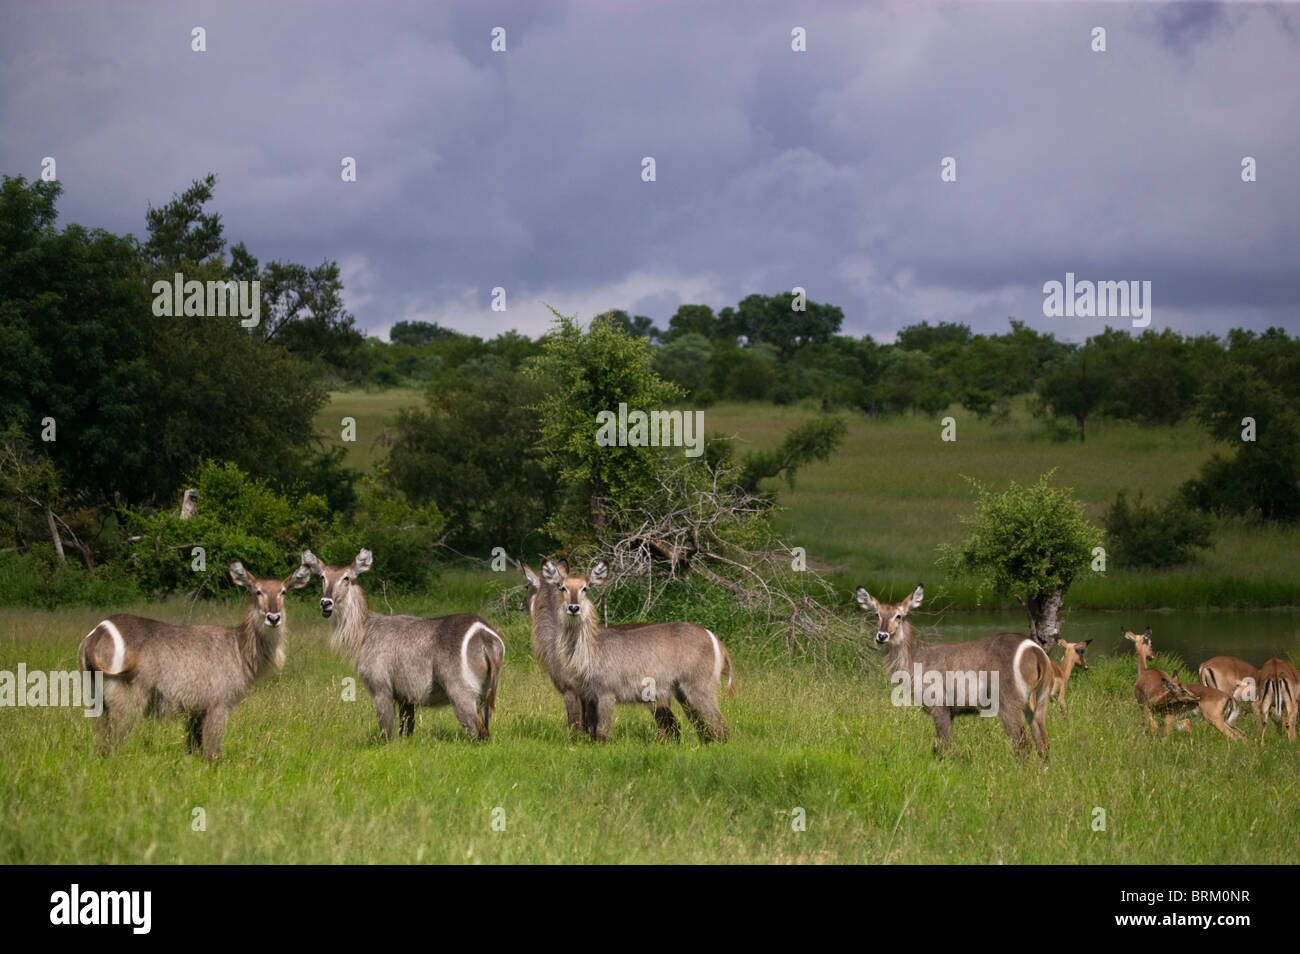 Scenic view of a herd of waterbuck in savanna under cloudy skies Stock Photo